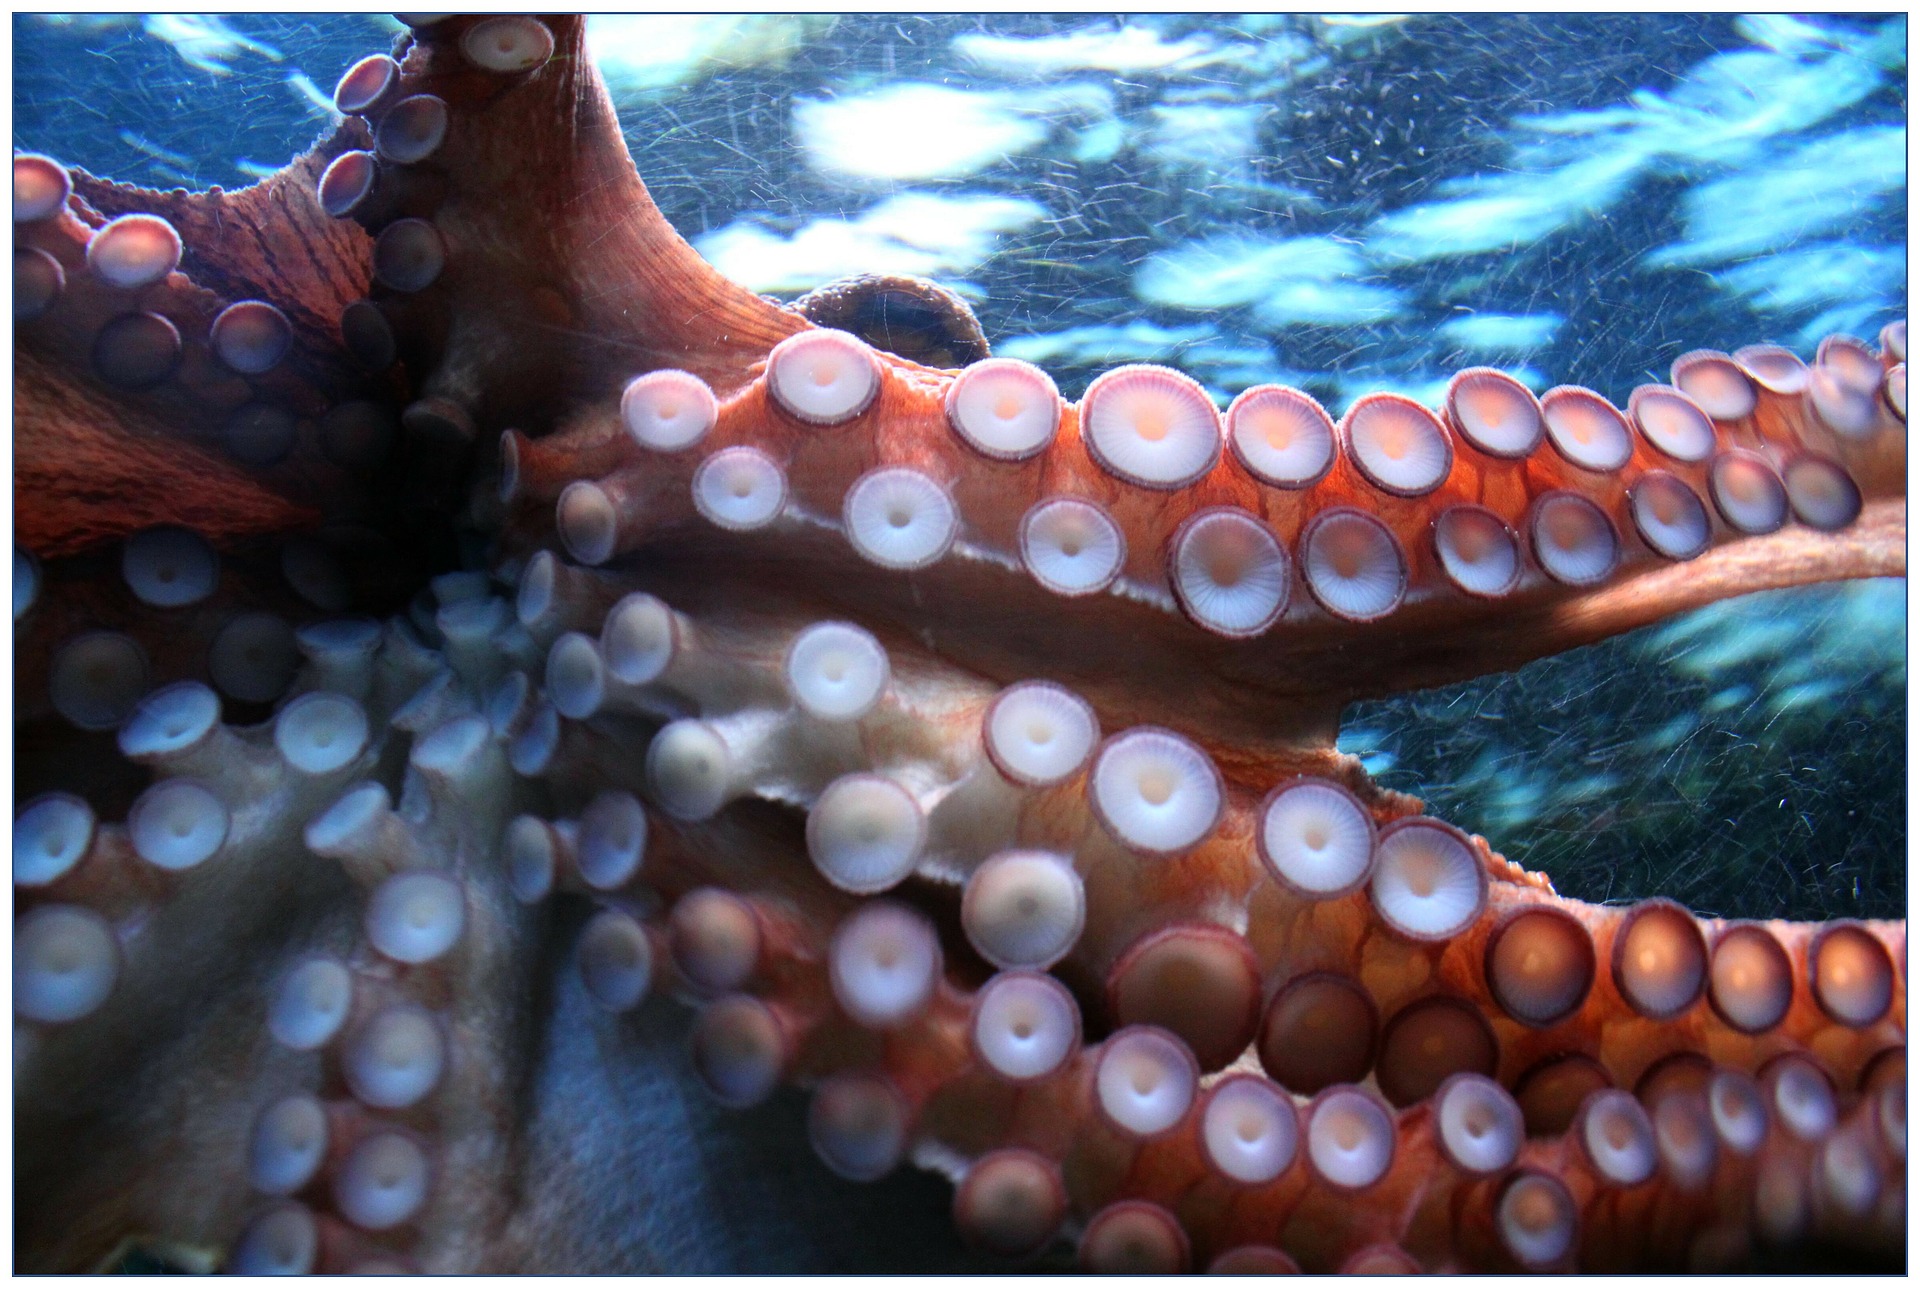 An octopus with its tentacles visible